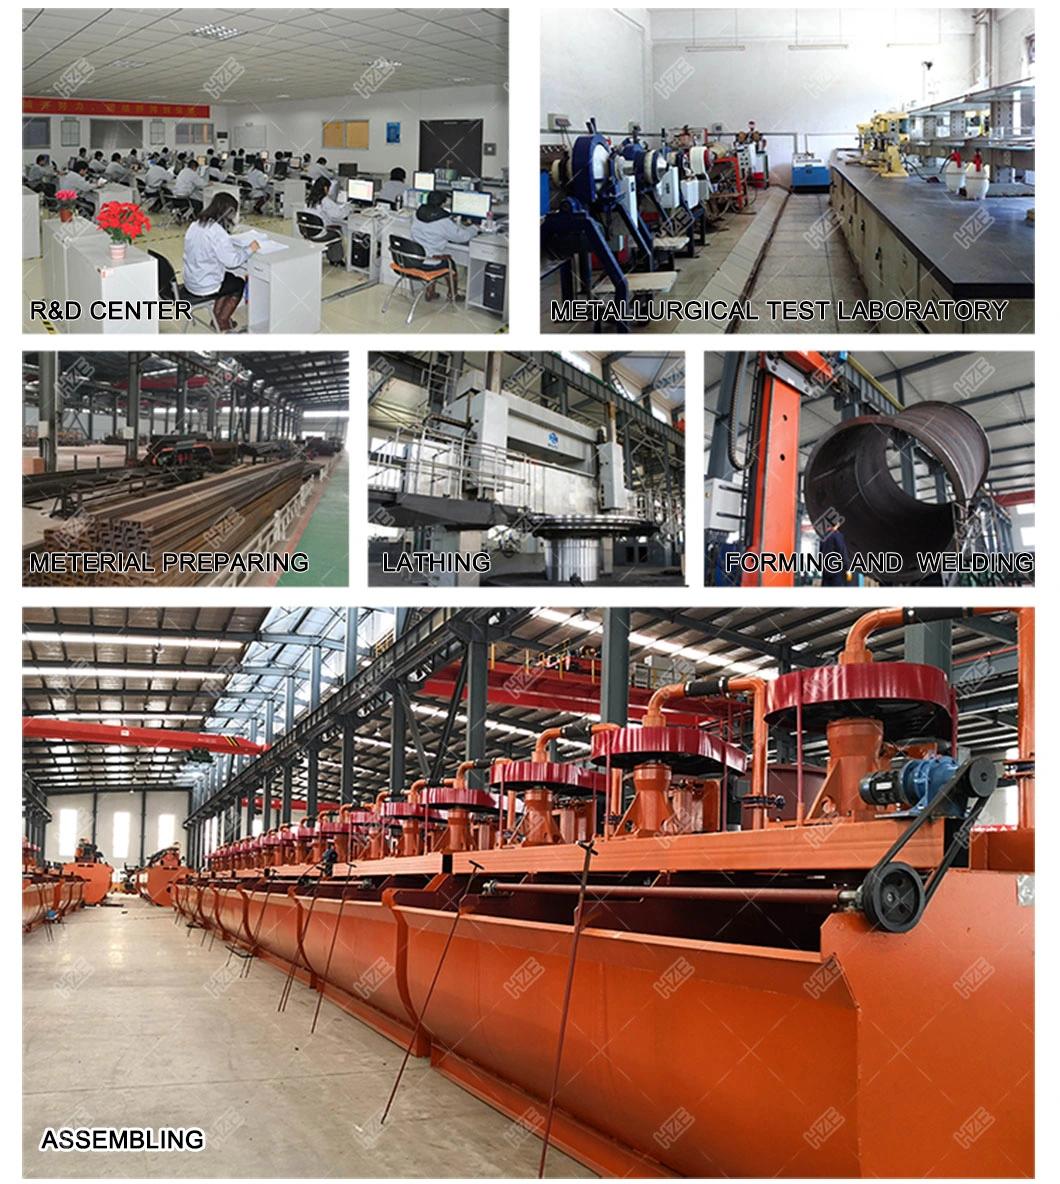 Hard Rock Gold Mining Machinery for Processing